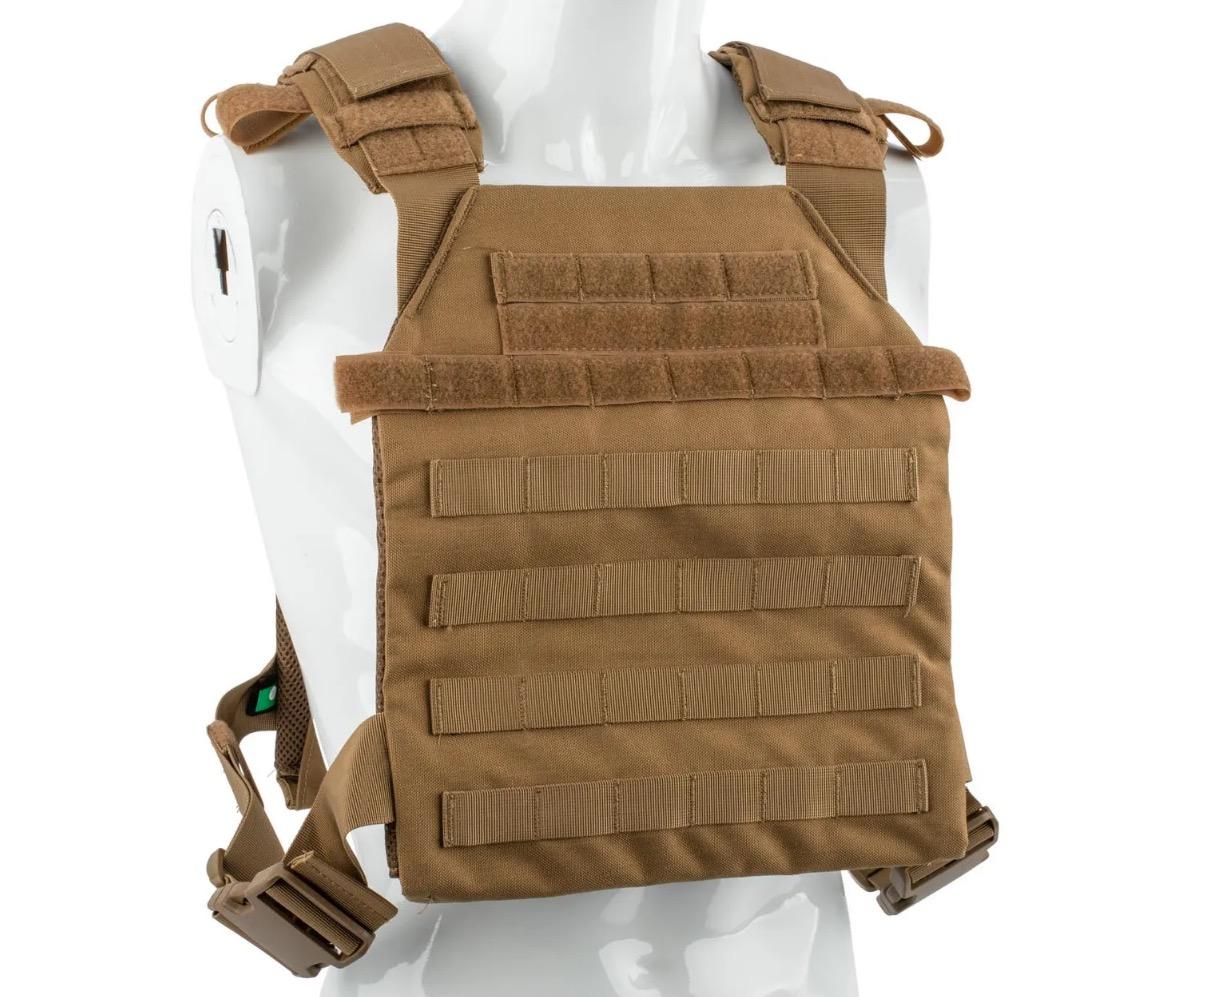 Condor Sentry Plate Carrier Coyote Brown - $35.99